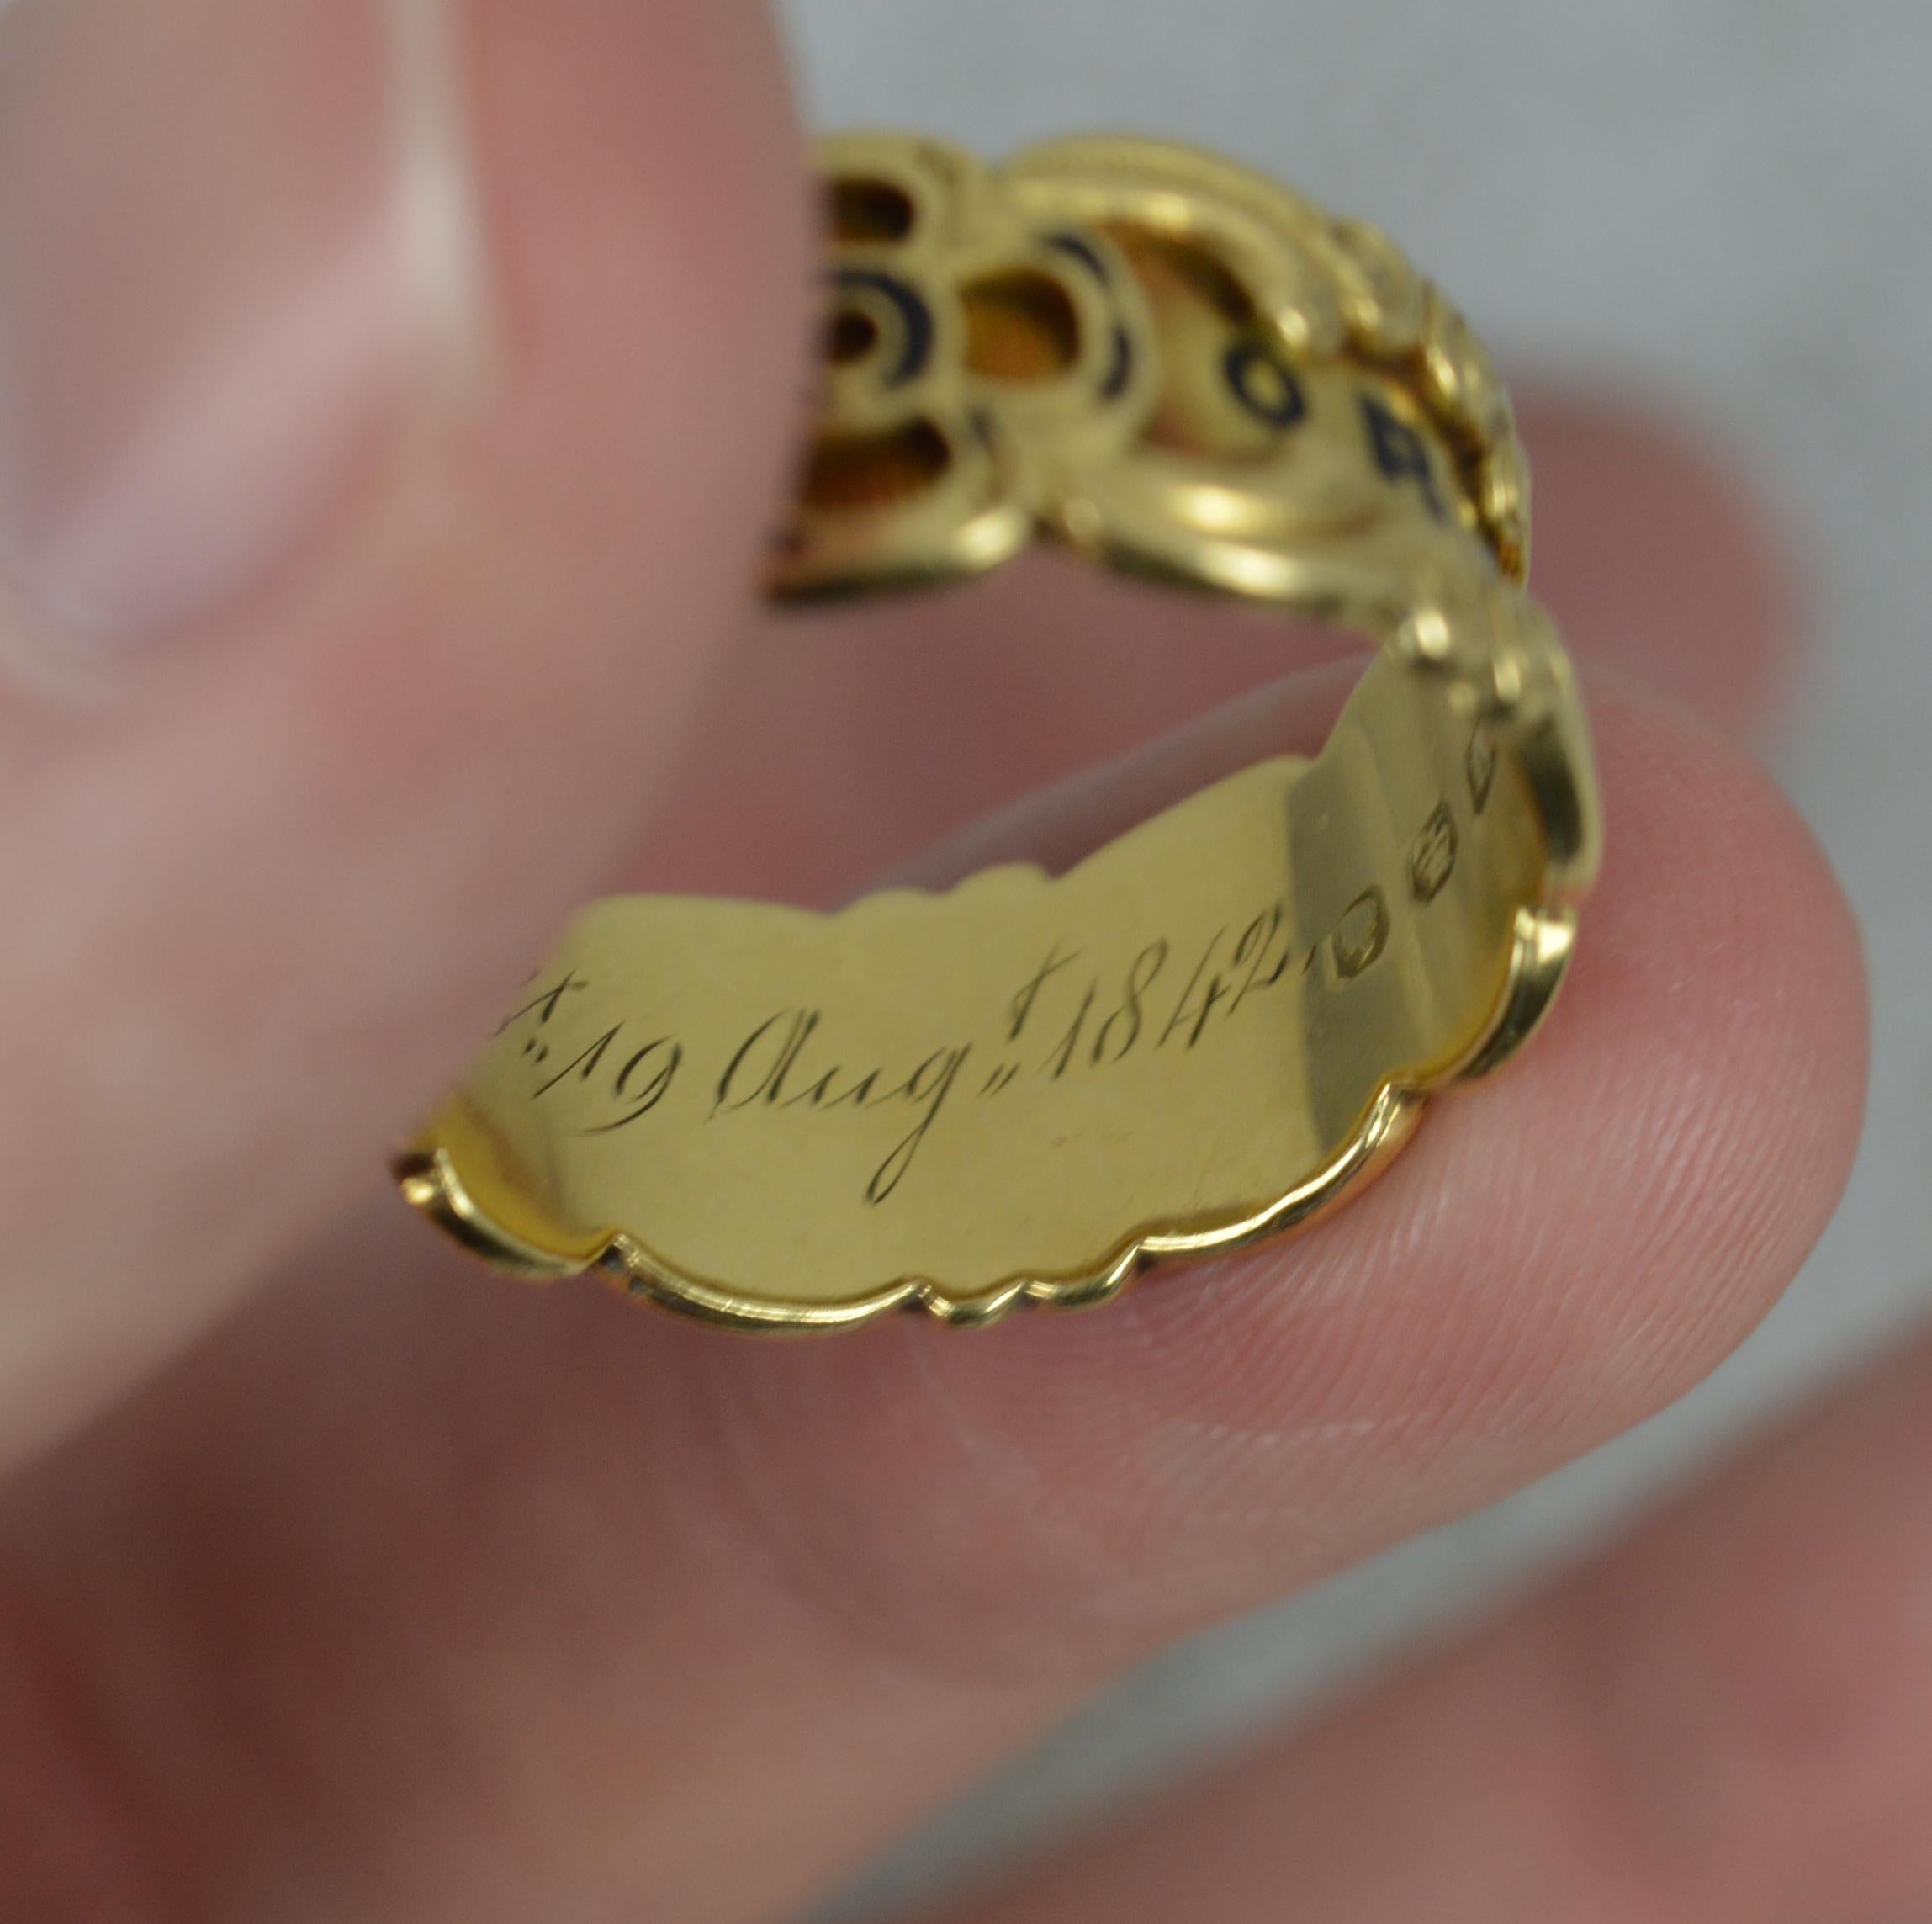 1842 Victorian 18 Carat Gold Enamel In Memory of Mourning Band Ring 2